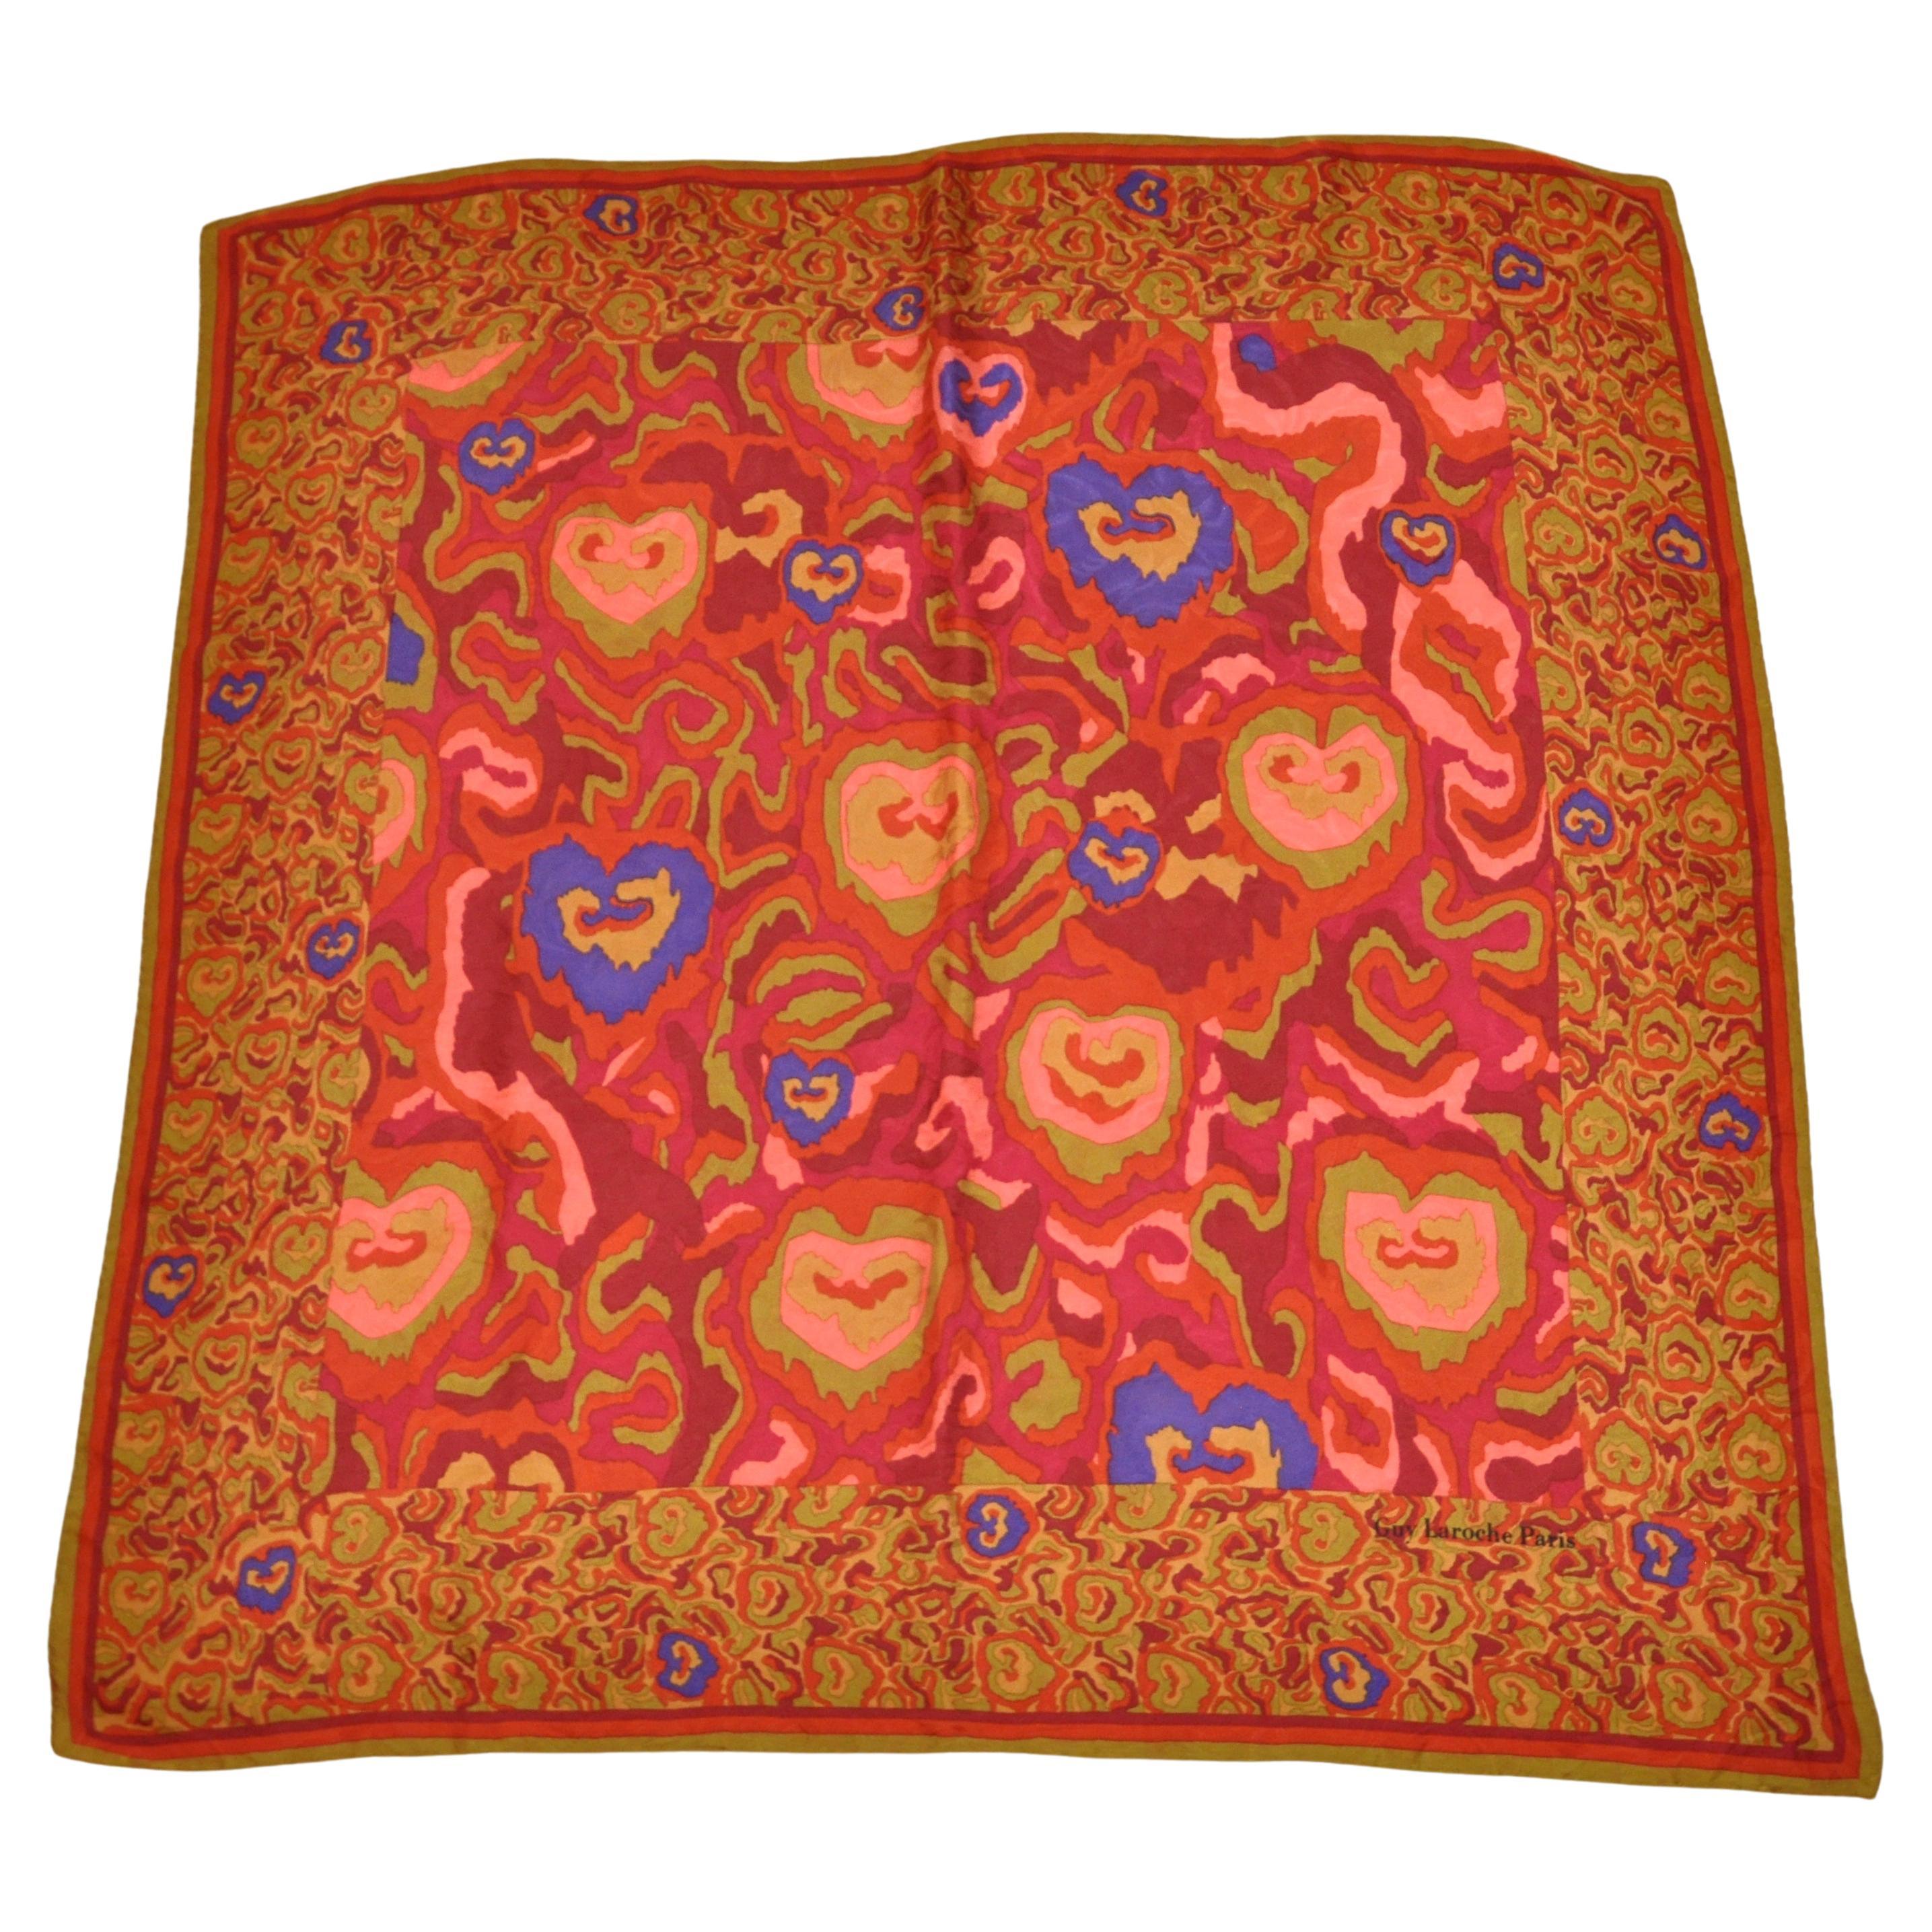 Guy Laroche Wonderfully Warm "Autumn Shades of Love and Happiness" Silk Scarf